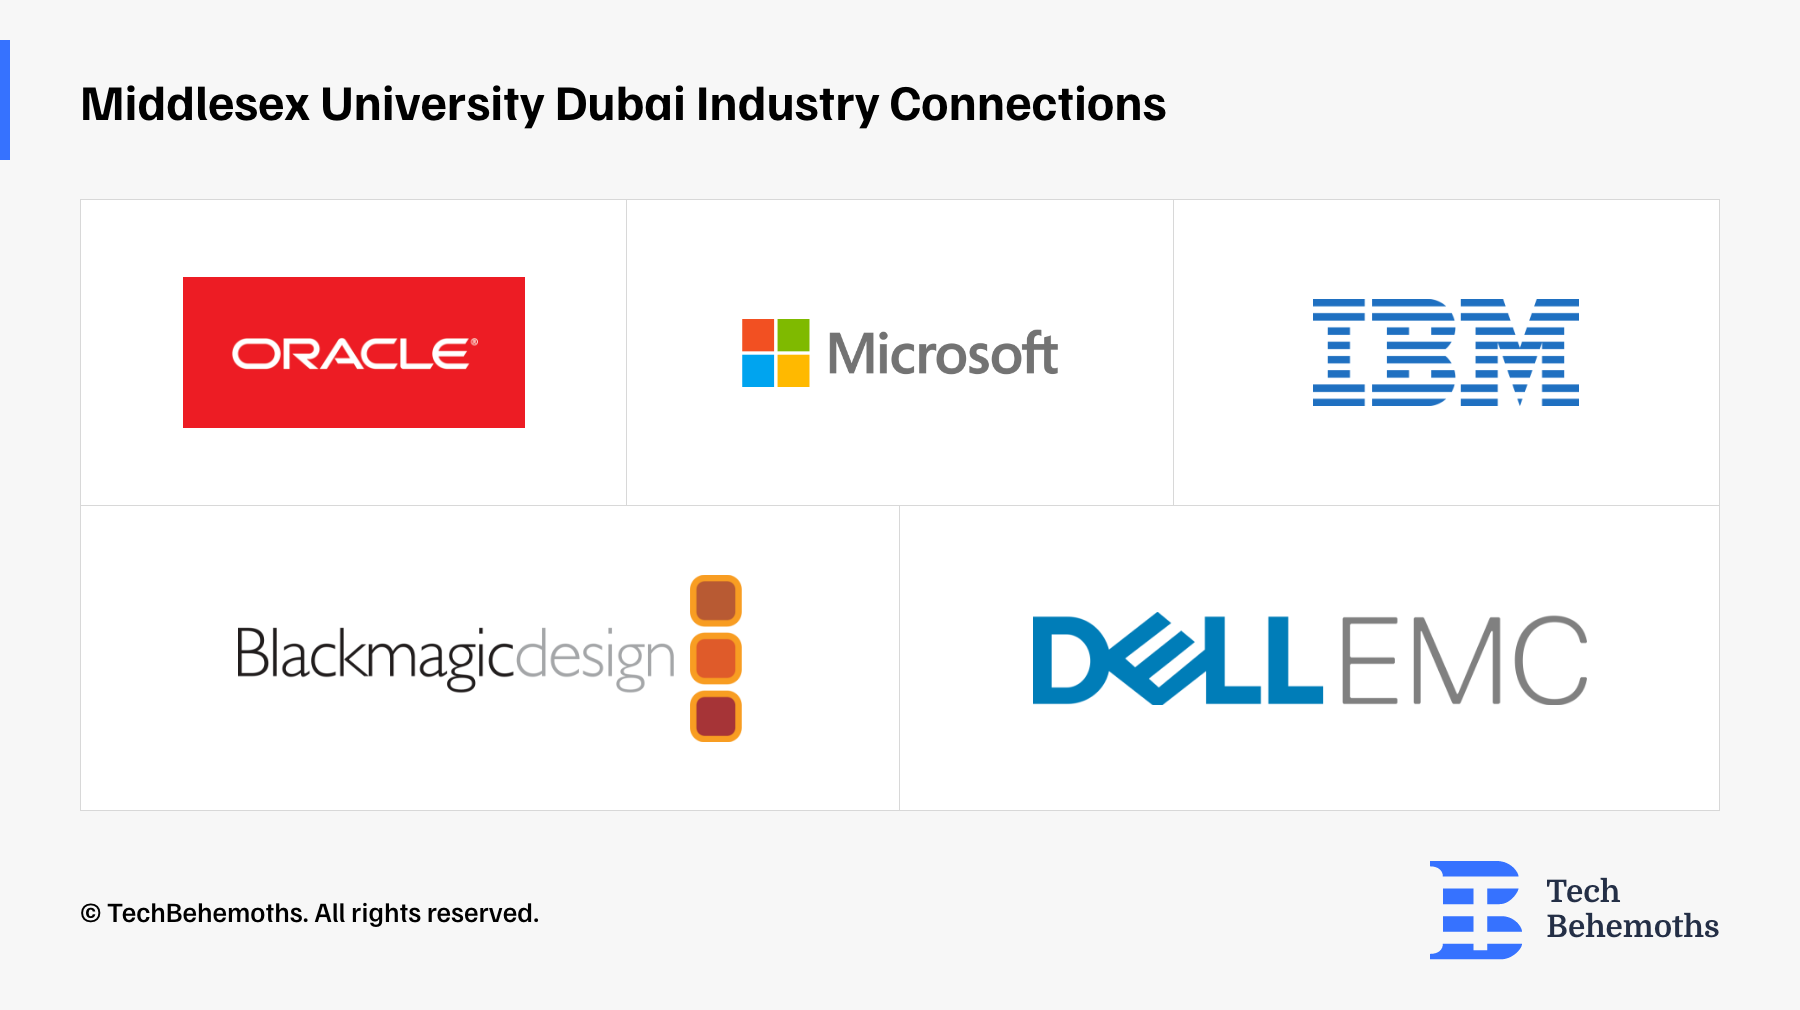 Middlesex University Dubai industry connections